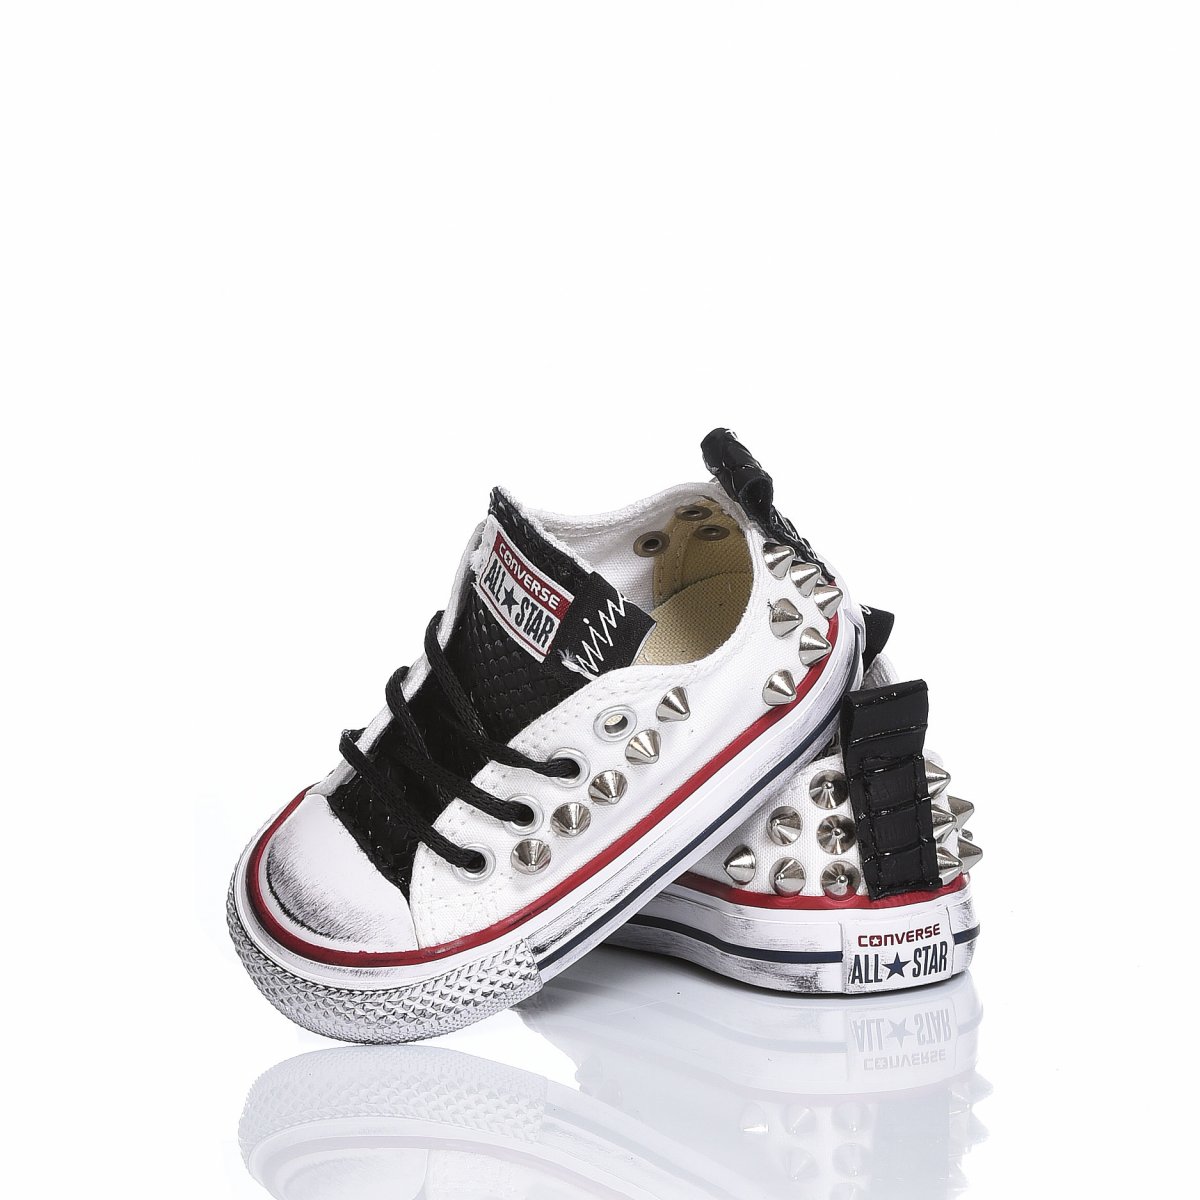 Converse Baby Black Spike Ox Chuck Taylor Ox Animalier, Borchie, Special